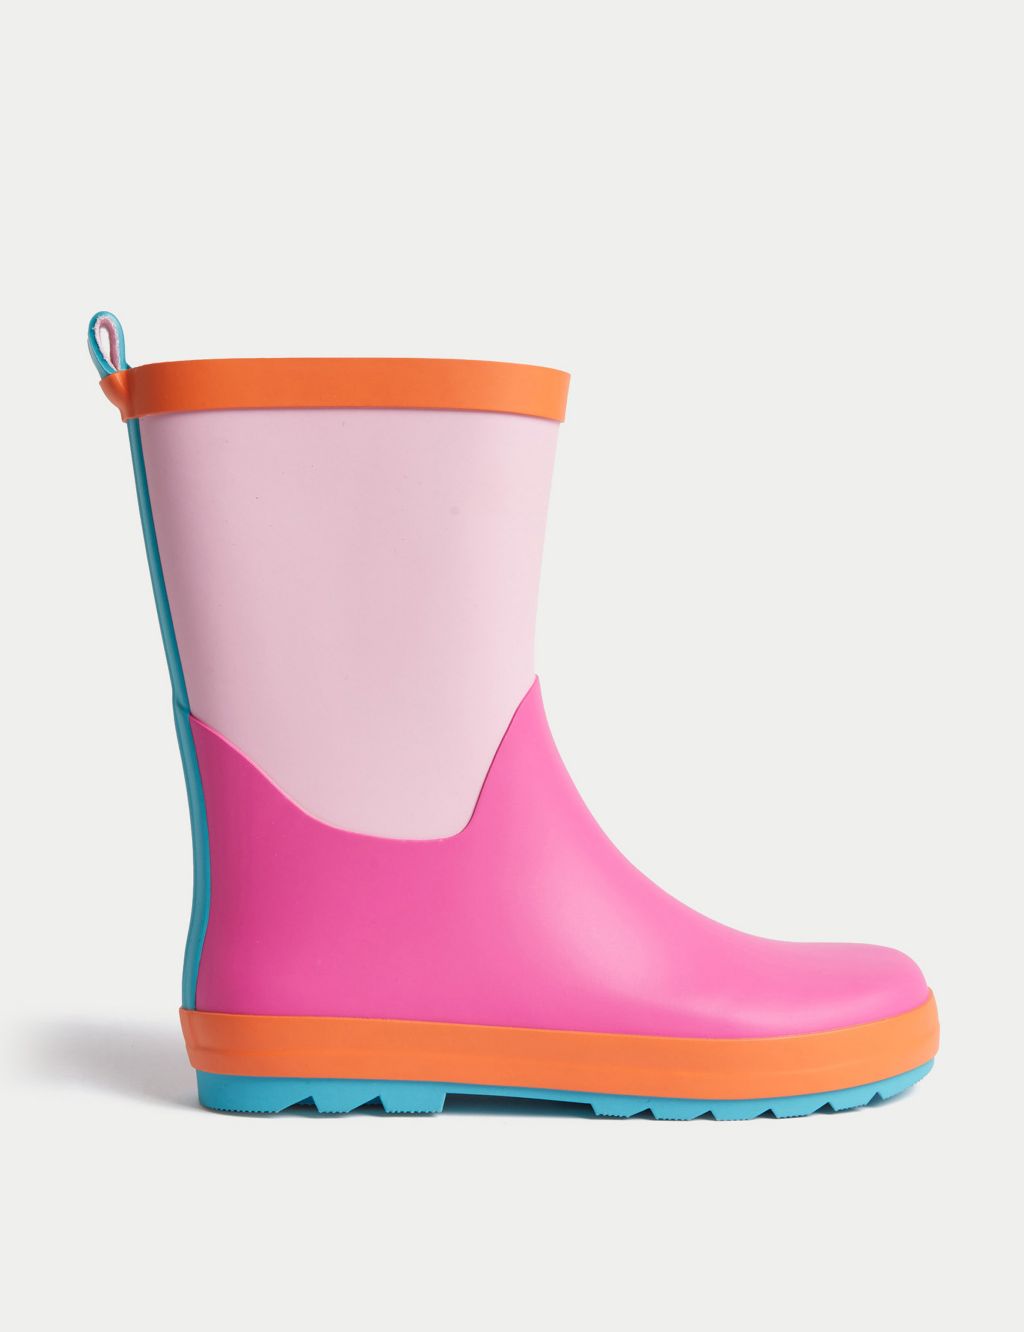 Kids' Colour Block Wellies (4 Small - 6 Large) image 1